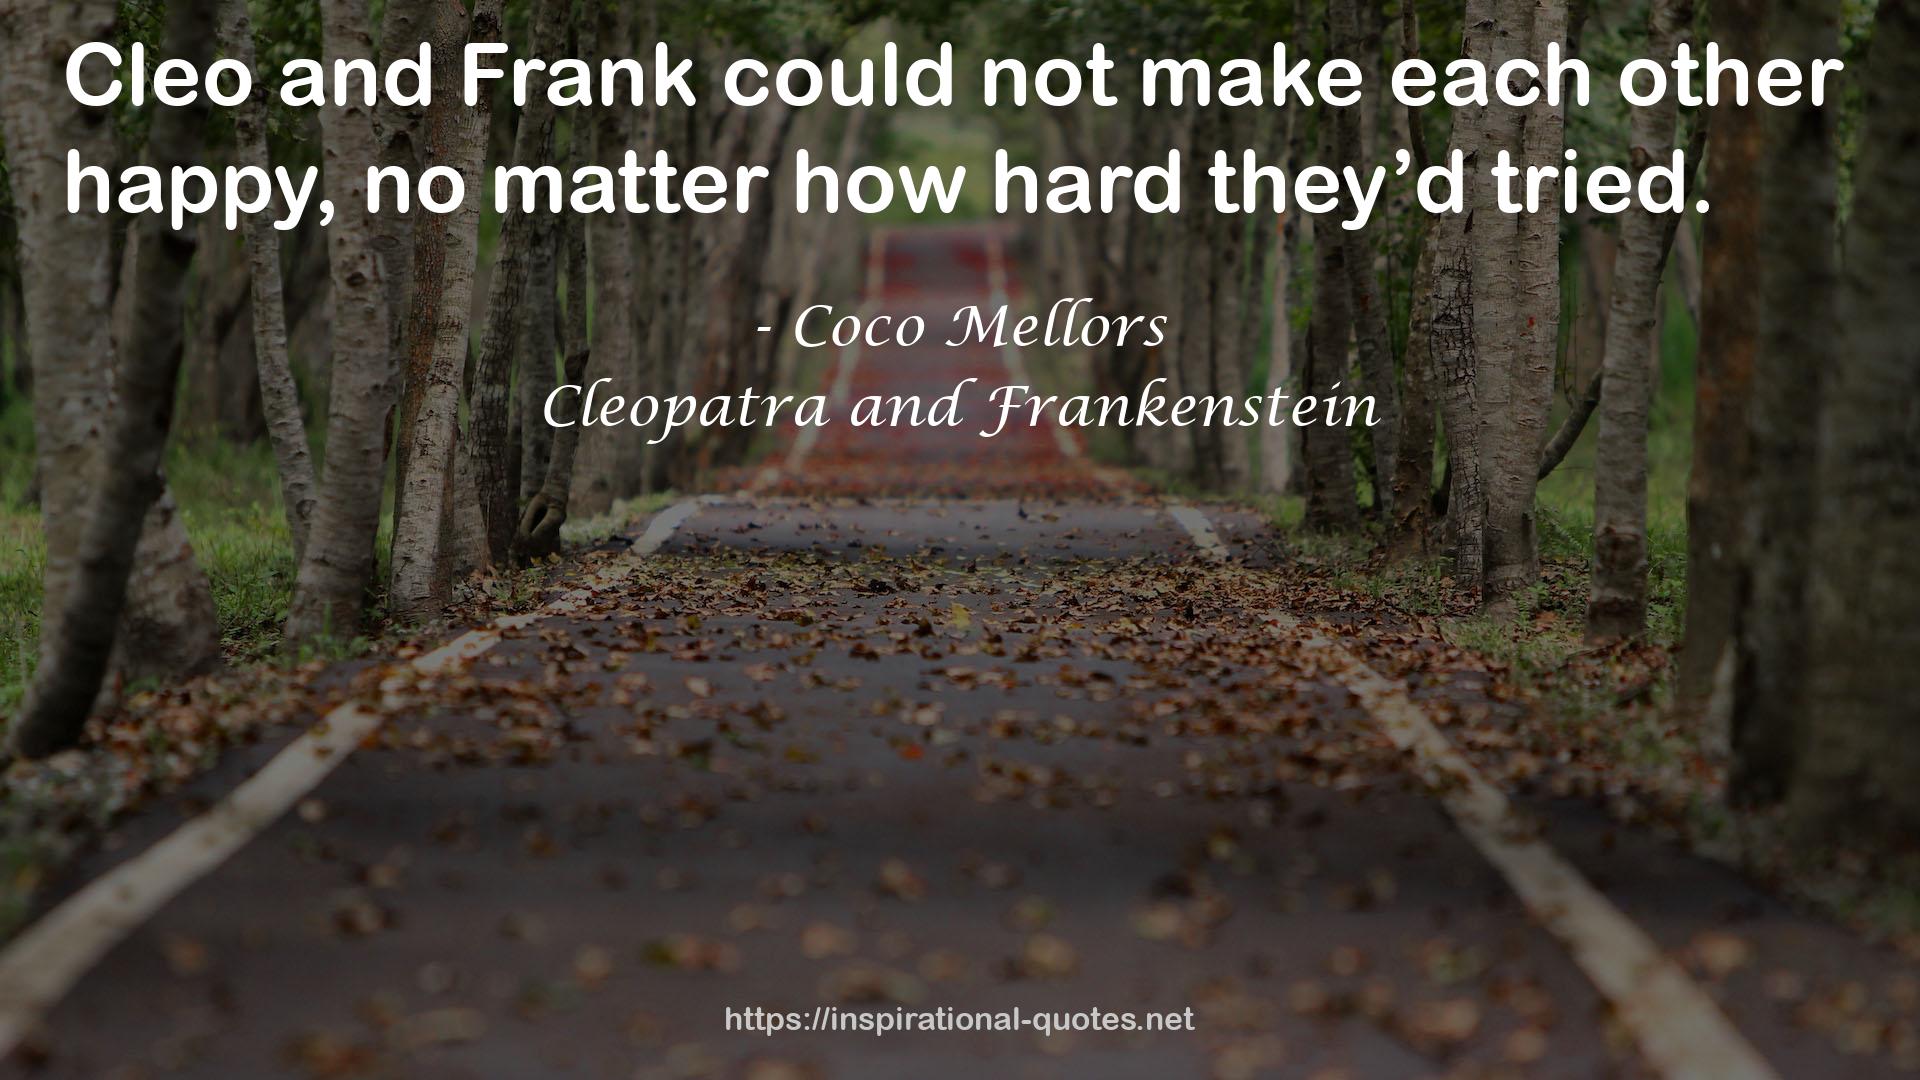 Cleopatra and Frankenstein QUOTES